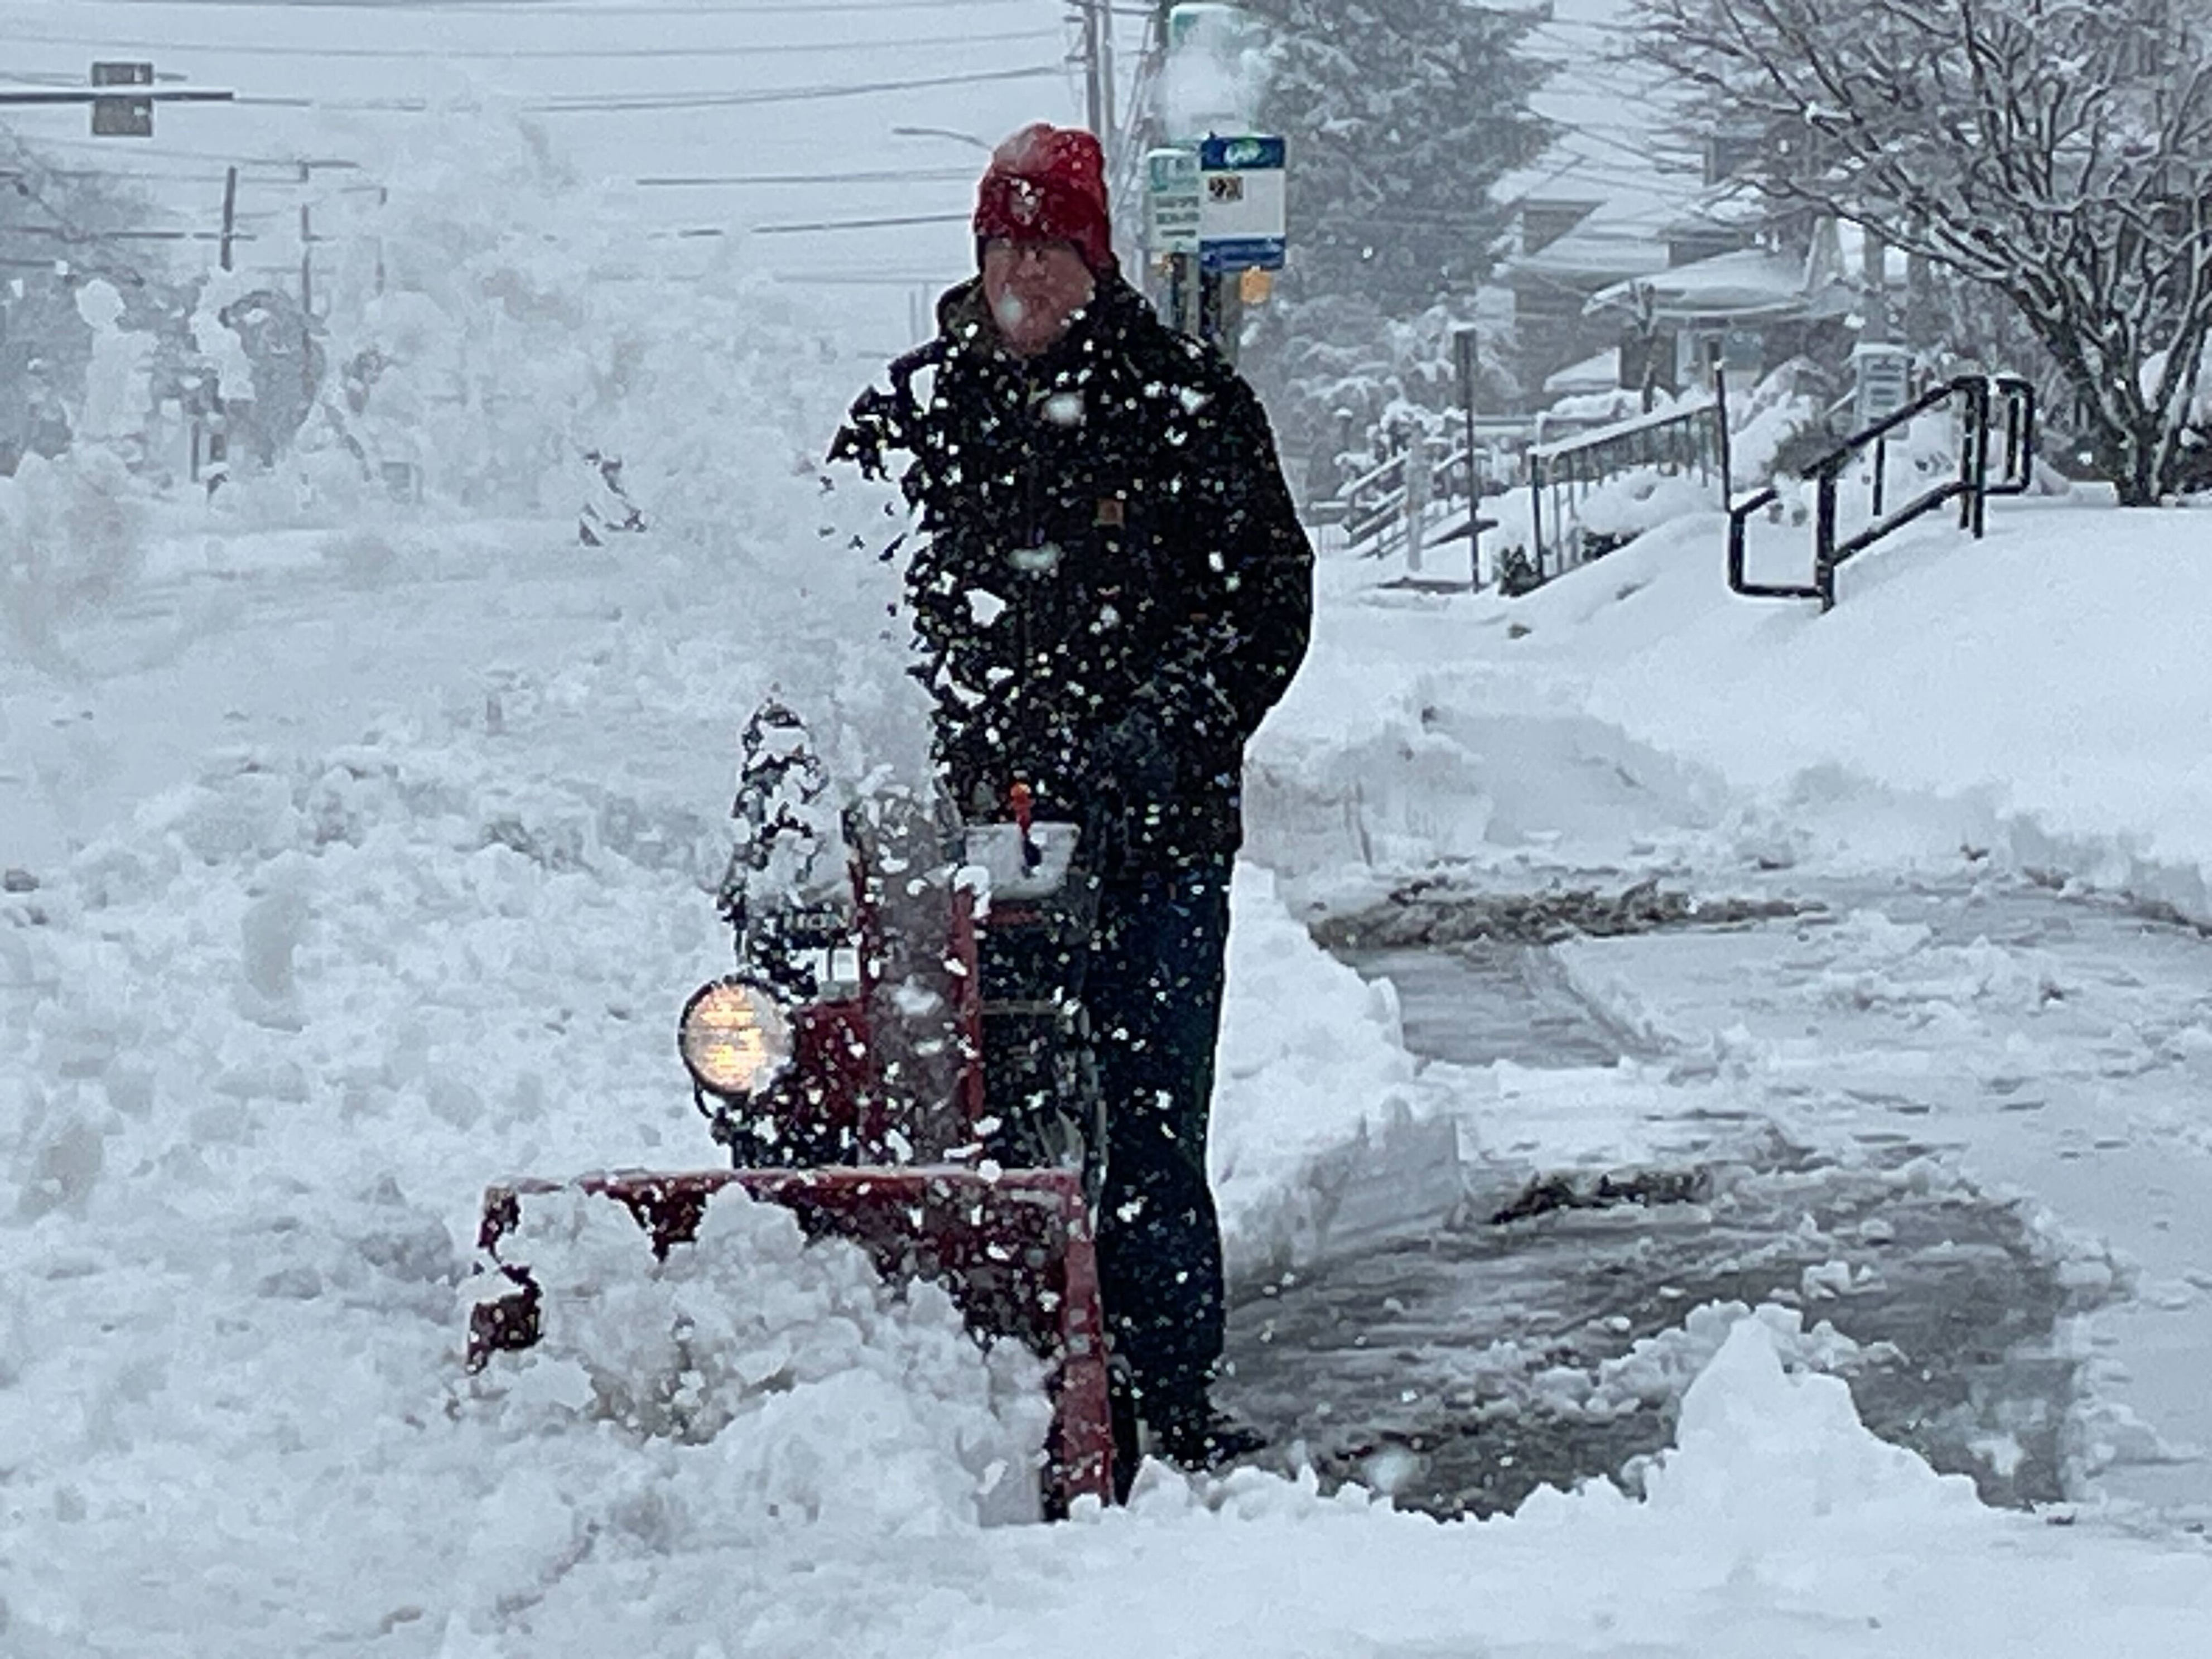 snow moves out of the lehigh valley after coastal storm delivers up to a foot of snow, causing widespread power outages